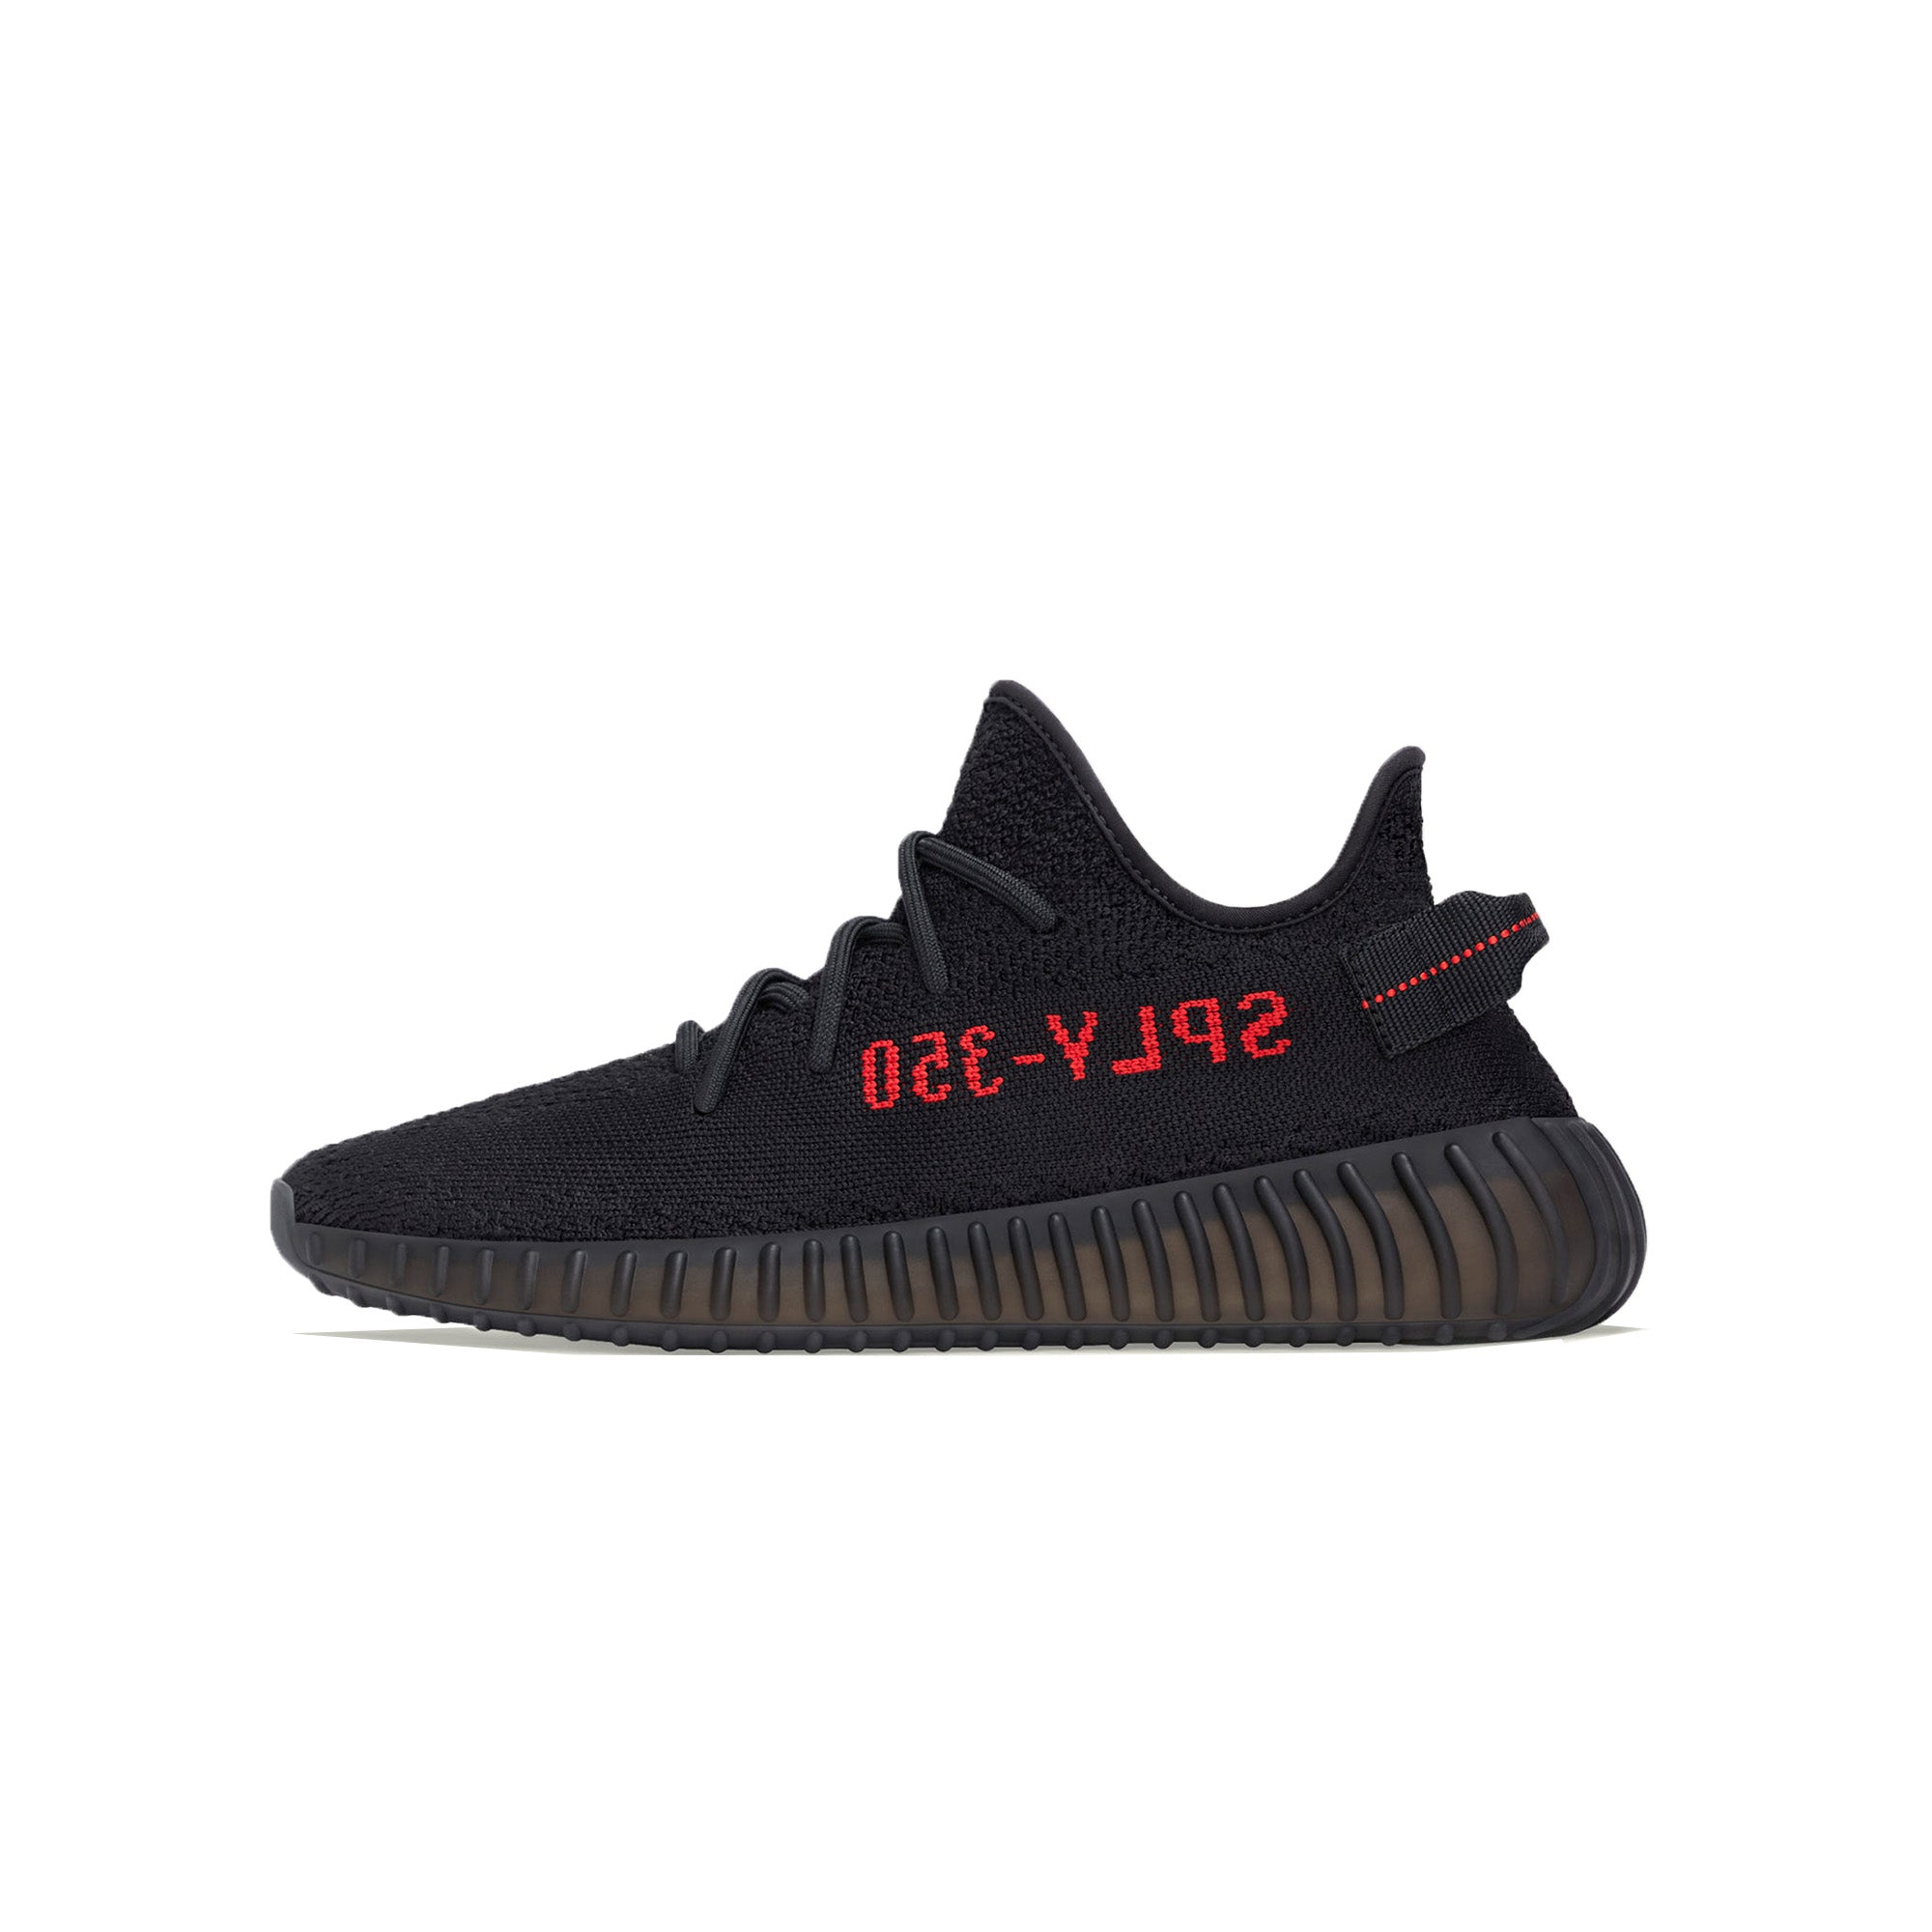 Adidas Mens Yeezy Boost 350 V2 Shoes